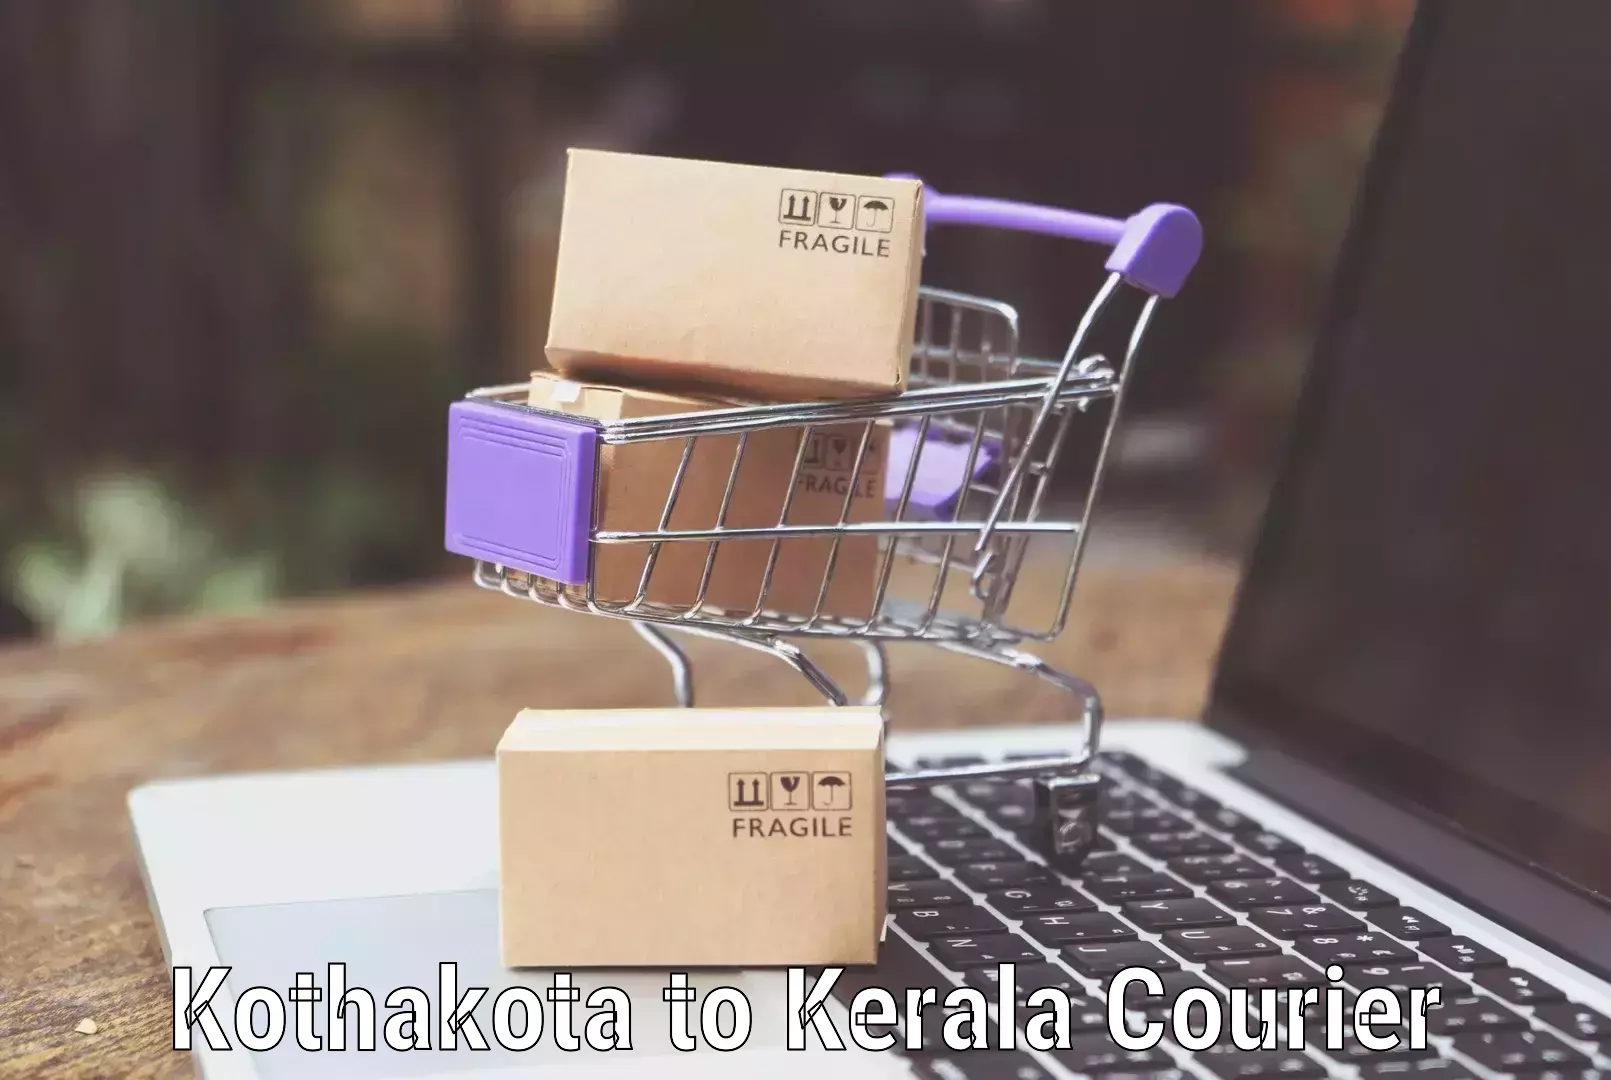 Comprehensive baggage service in Kothakota to Cochin University of Science and Technology